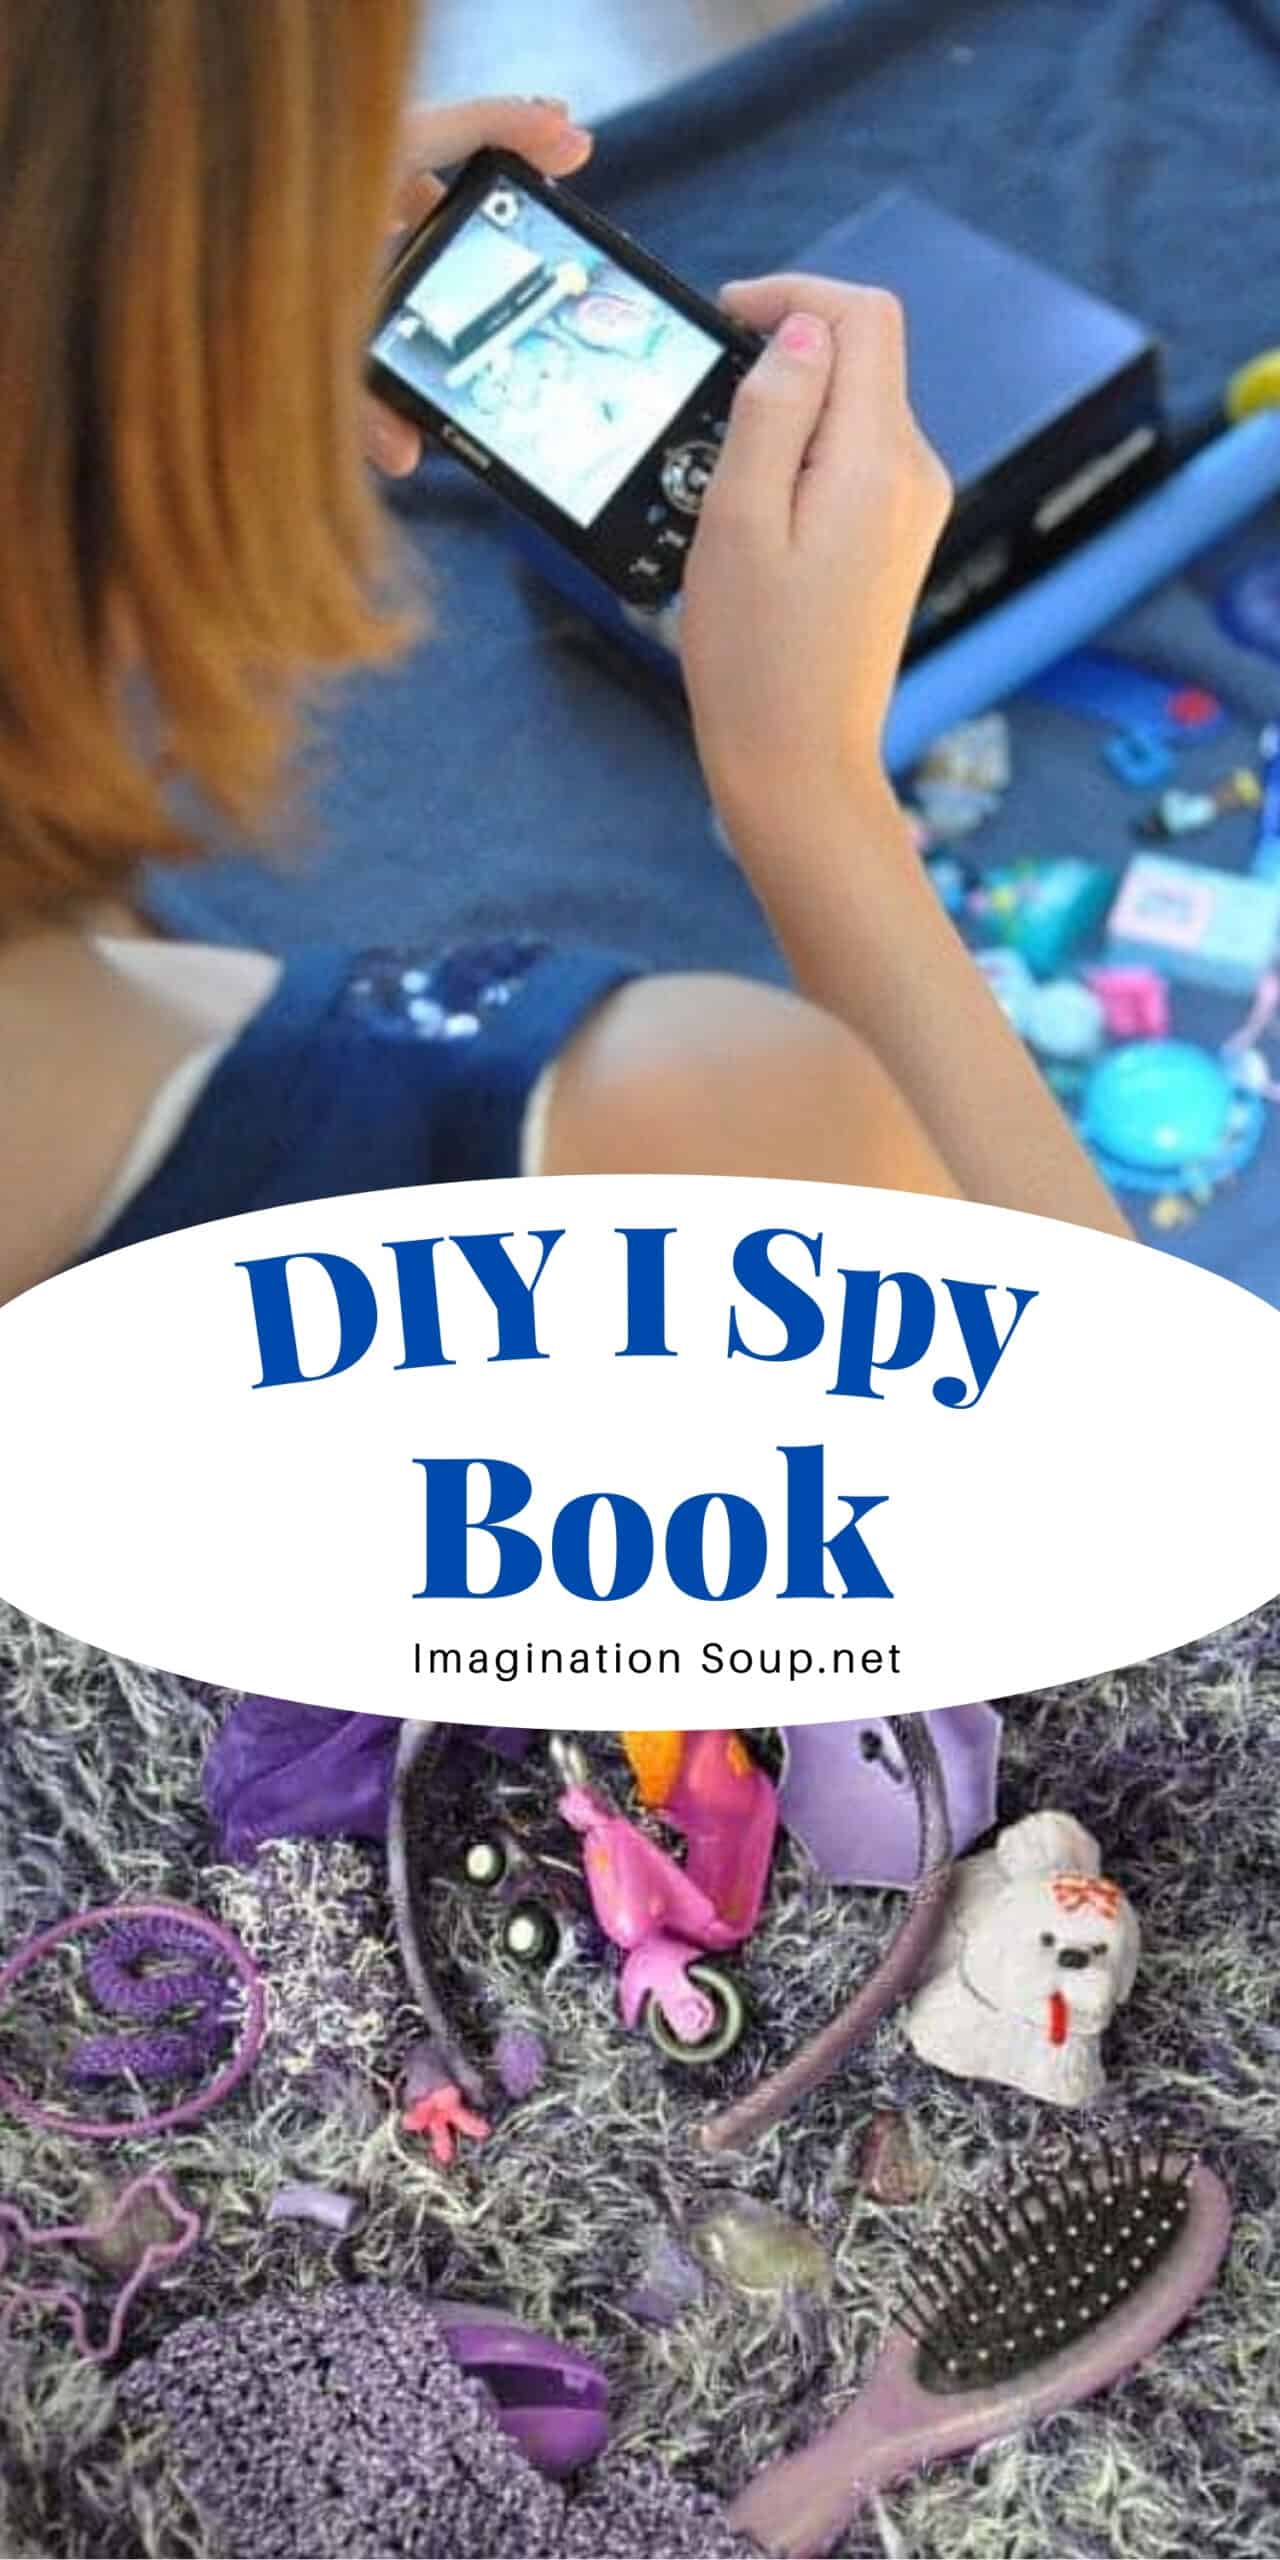 Make your own I spy book